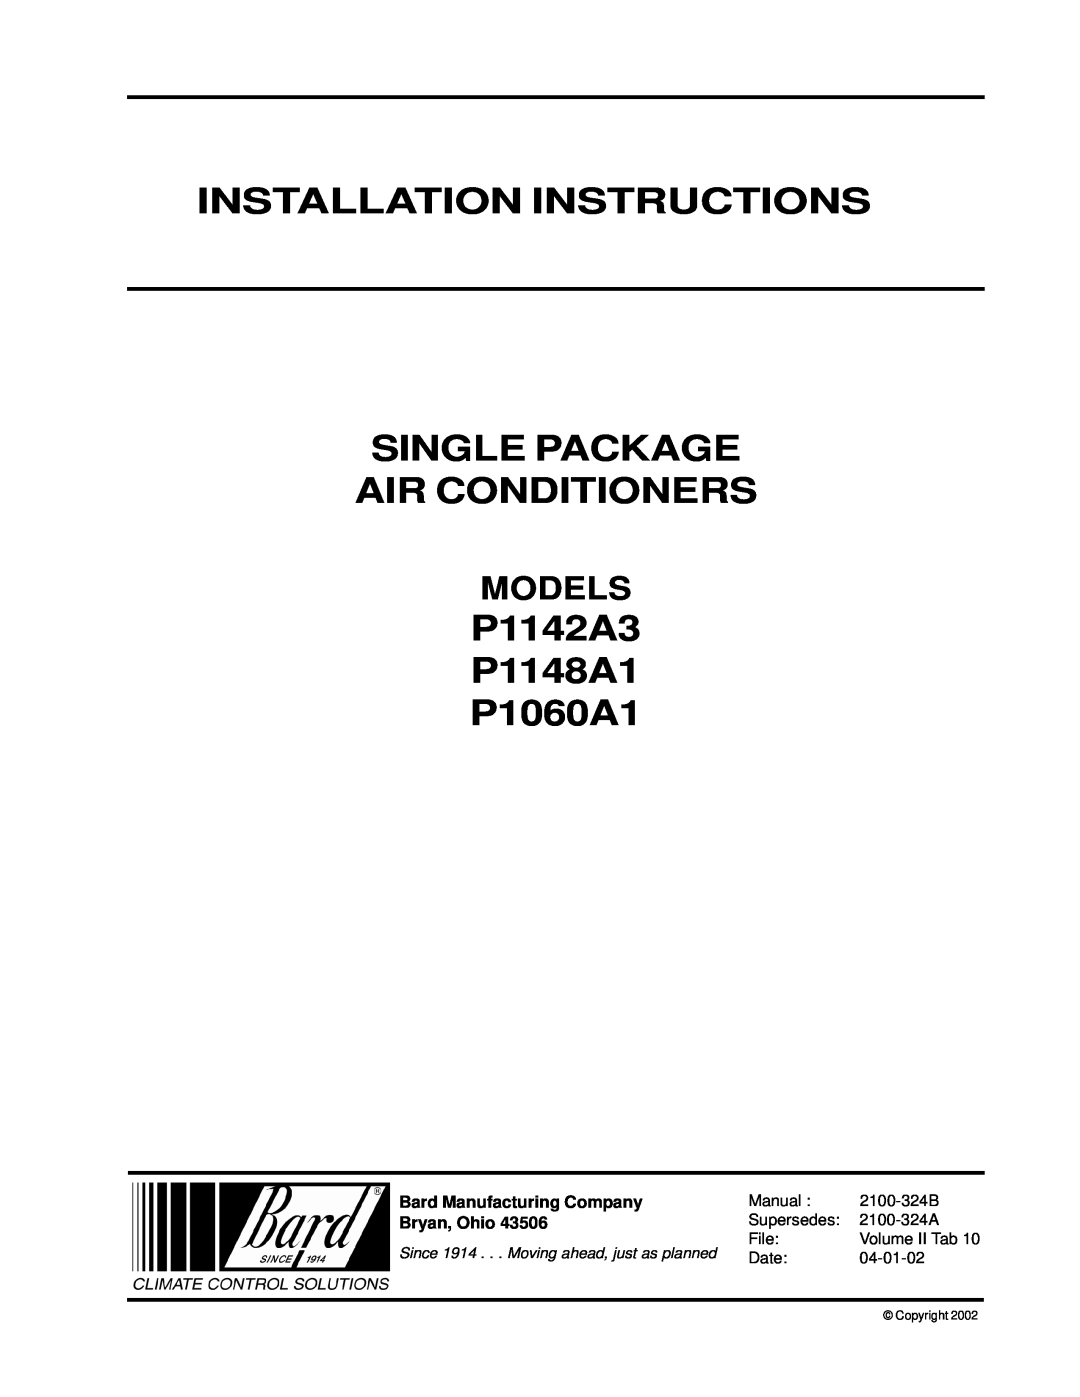 Bard P1142A3 installation instructions Models, Bard Manufacturing Company, Bryan, Ohio, Air Conditioners, Copyright 